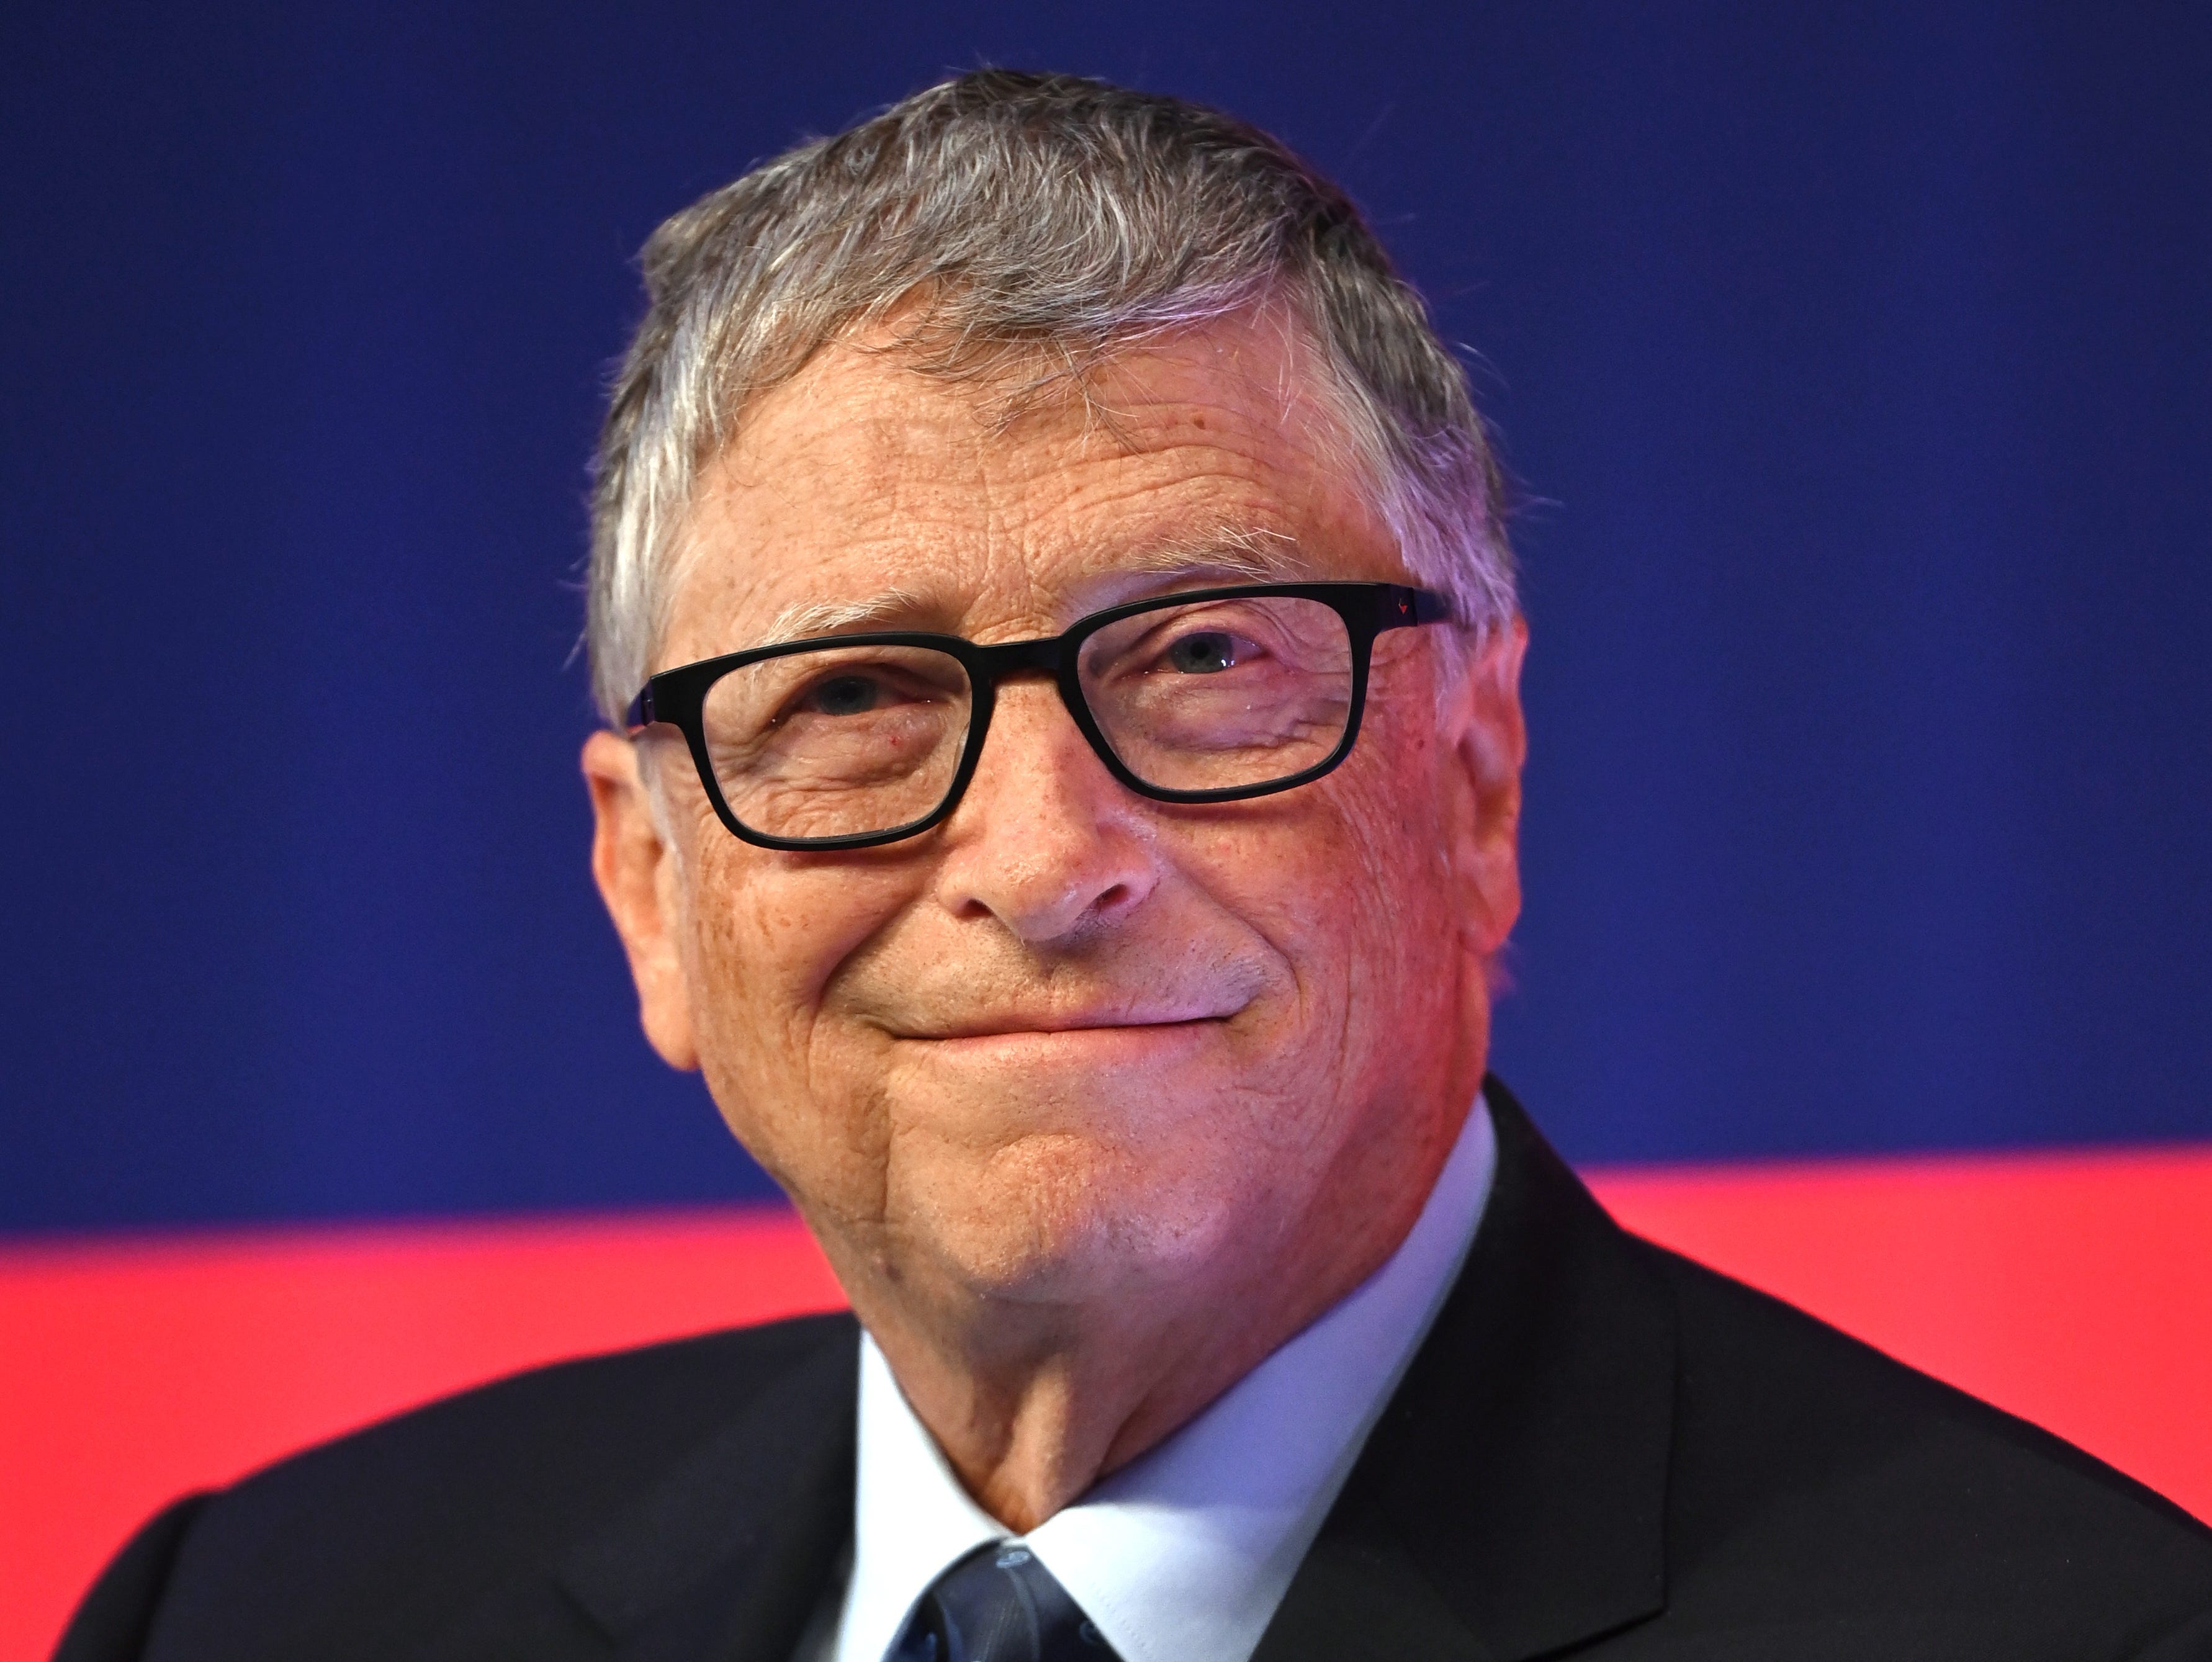 Bill Gates is known to make book recommendations quite often.